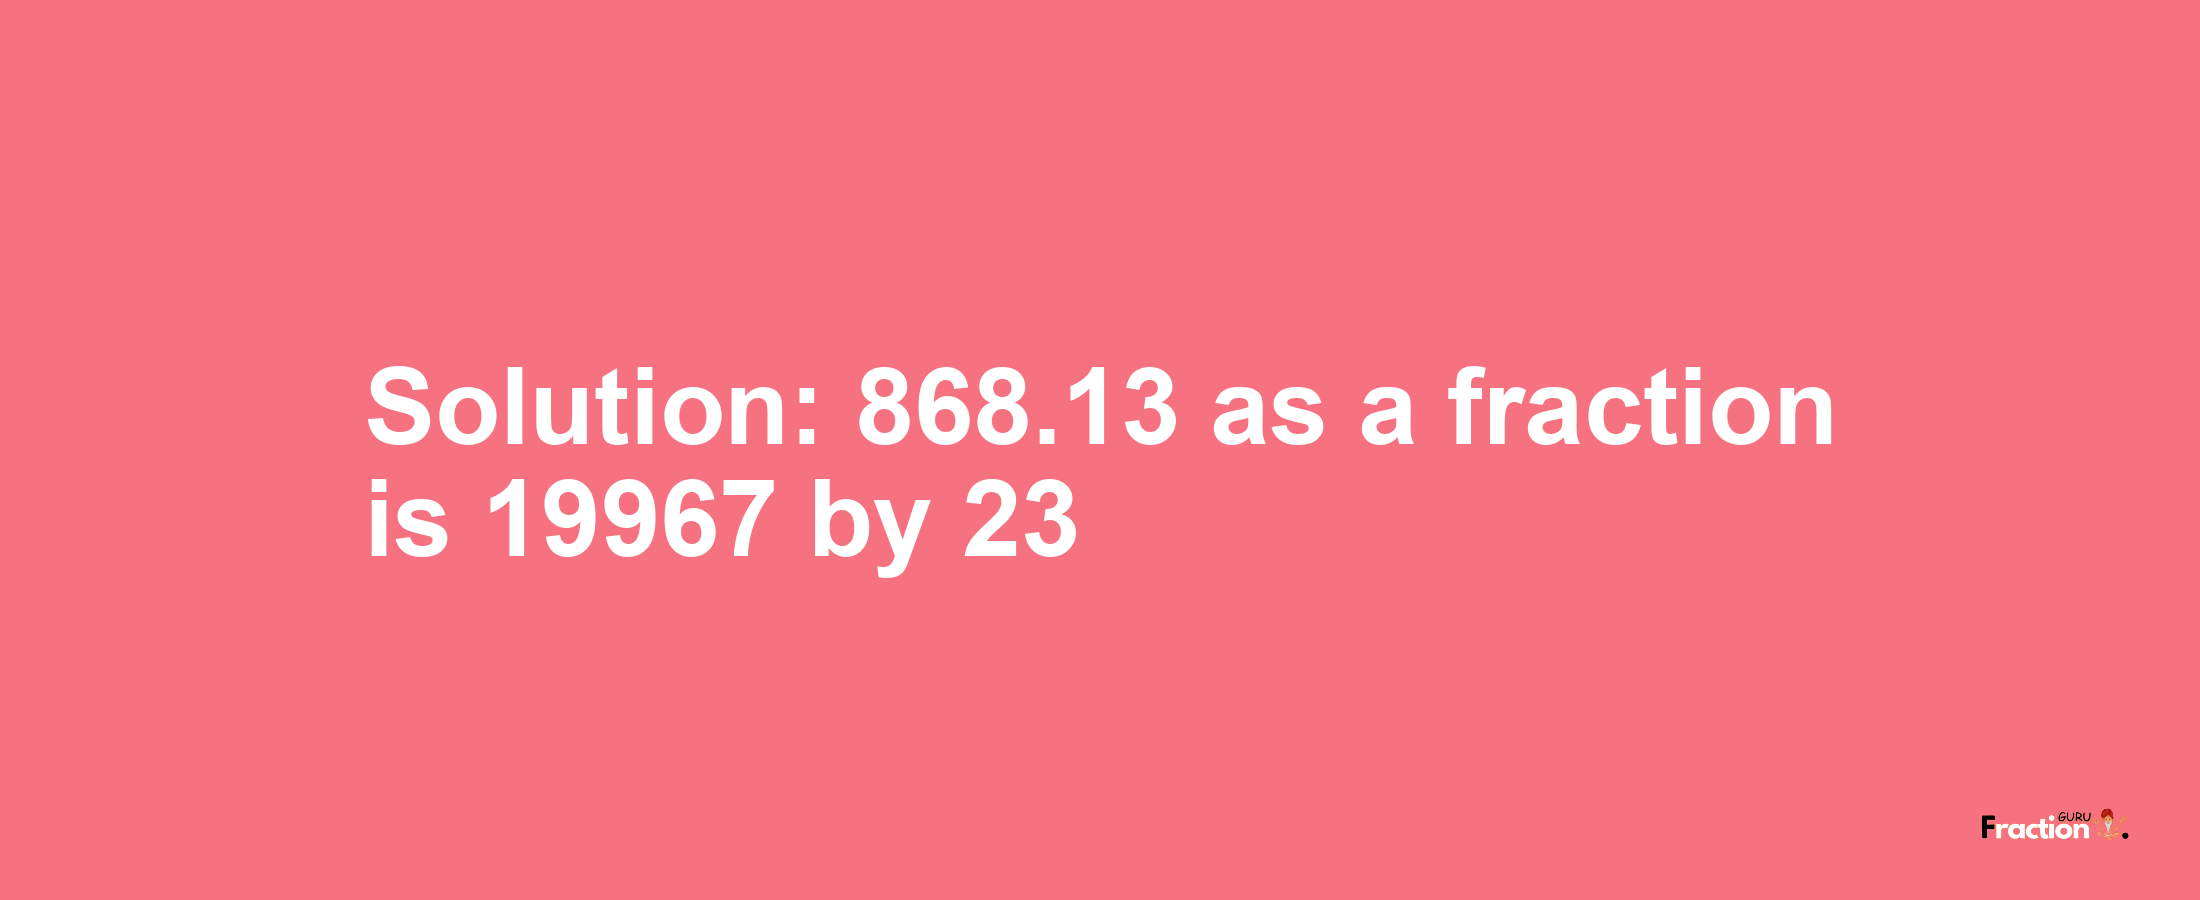 Solution:868.13 as a fraction is 19967/23